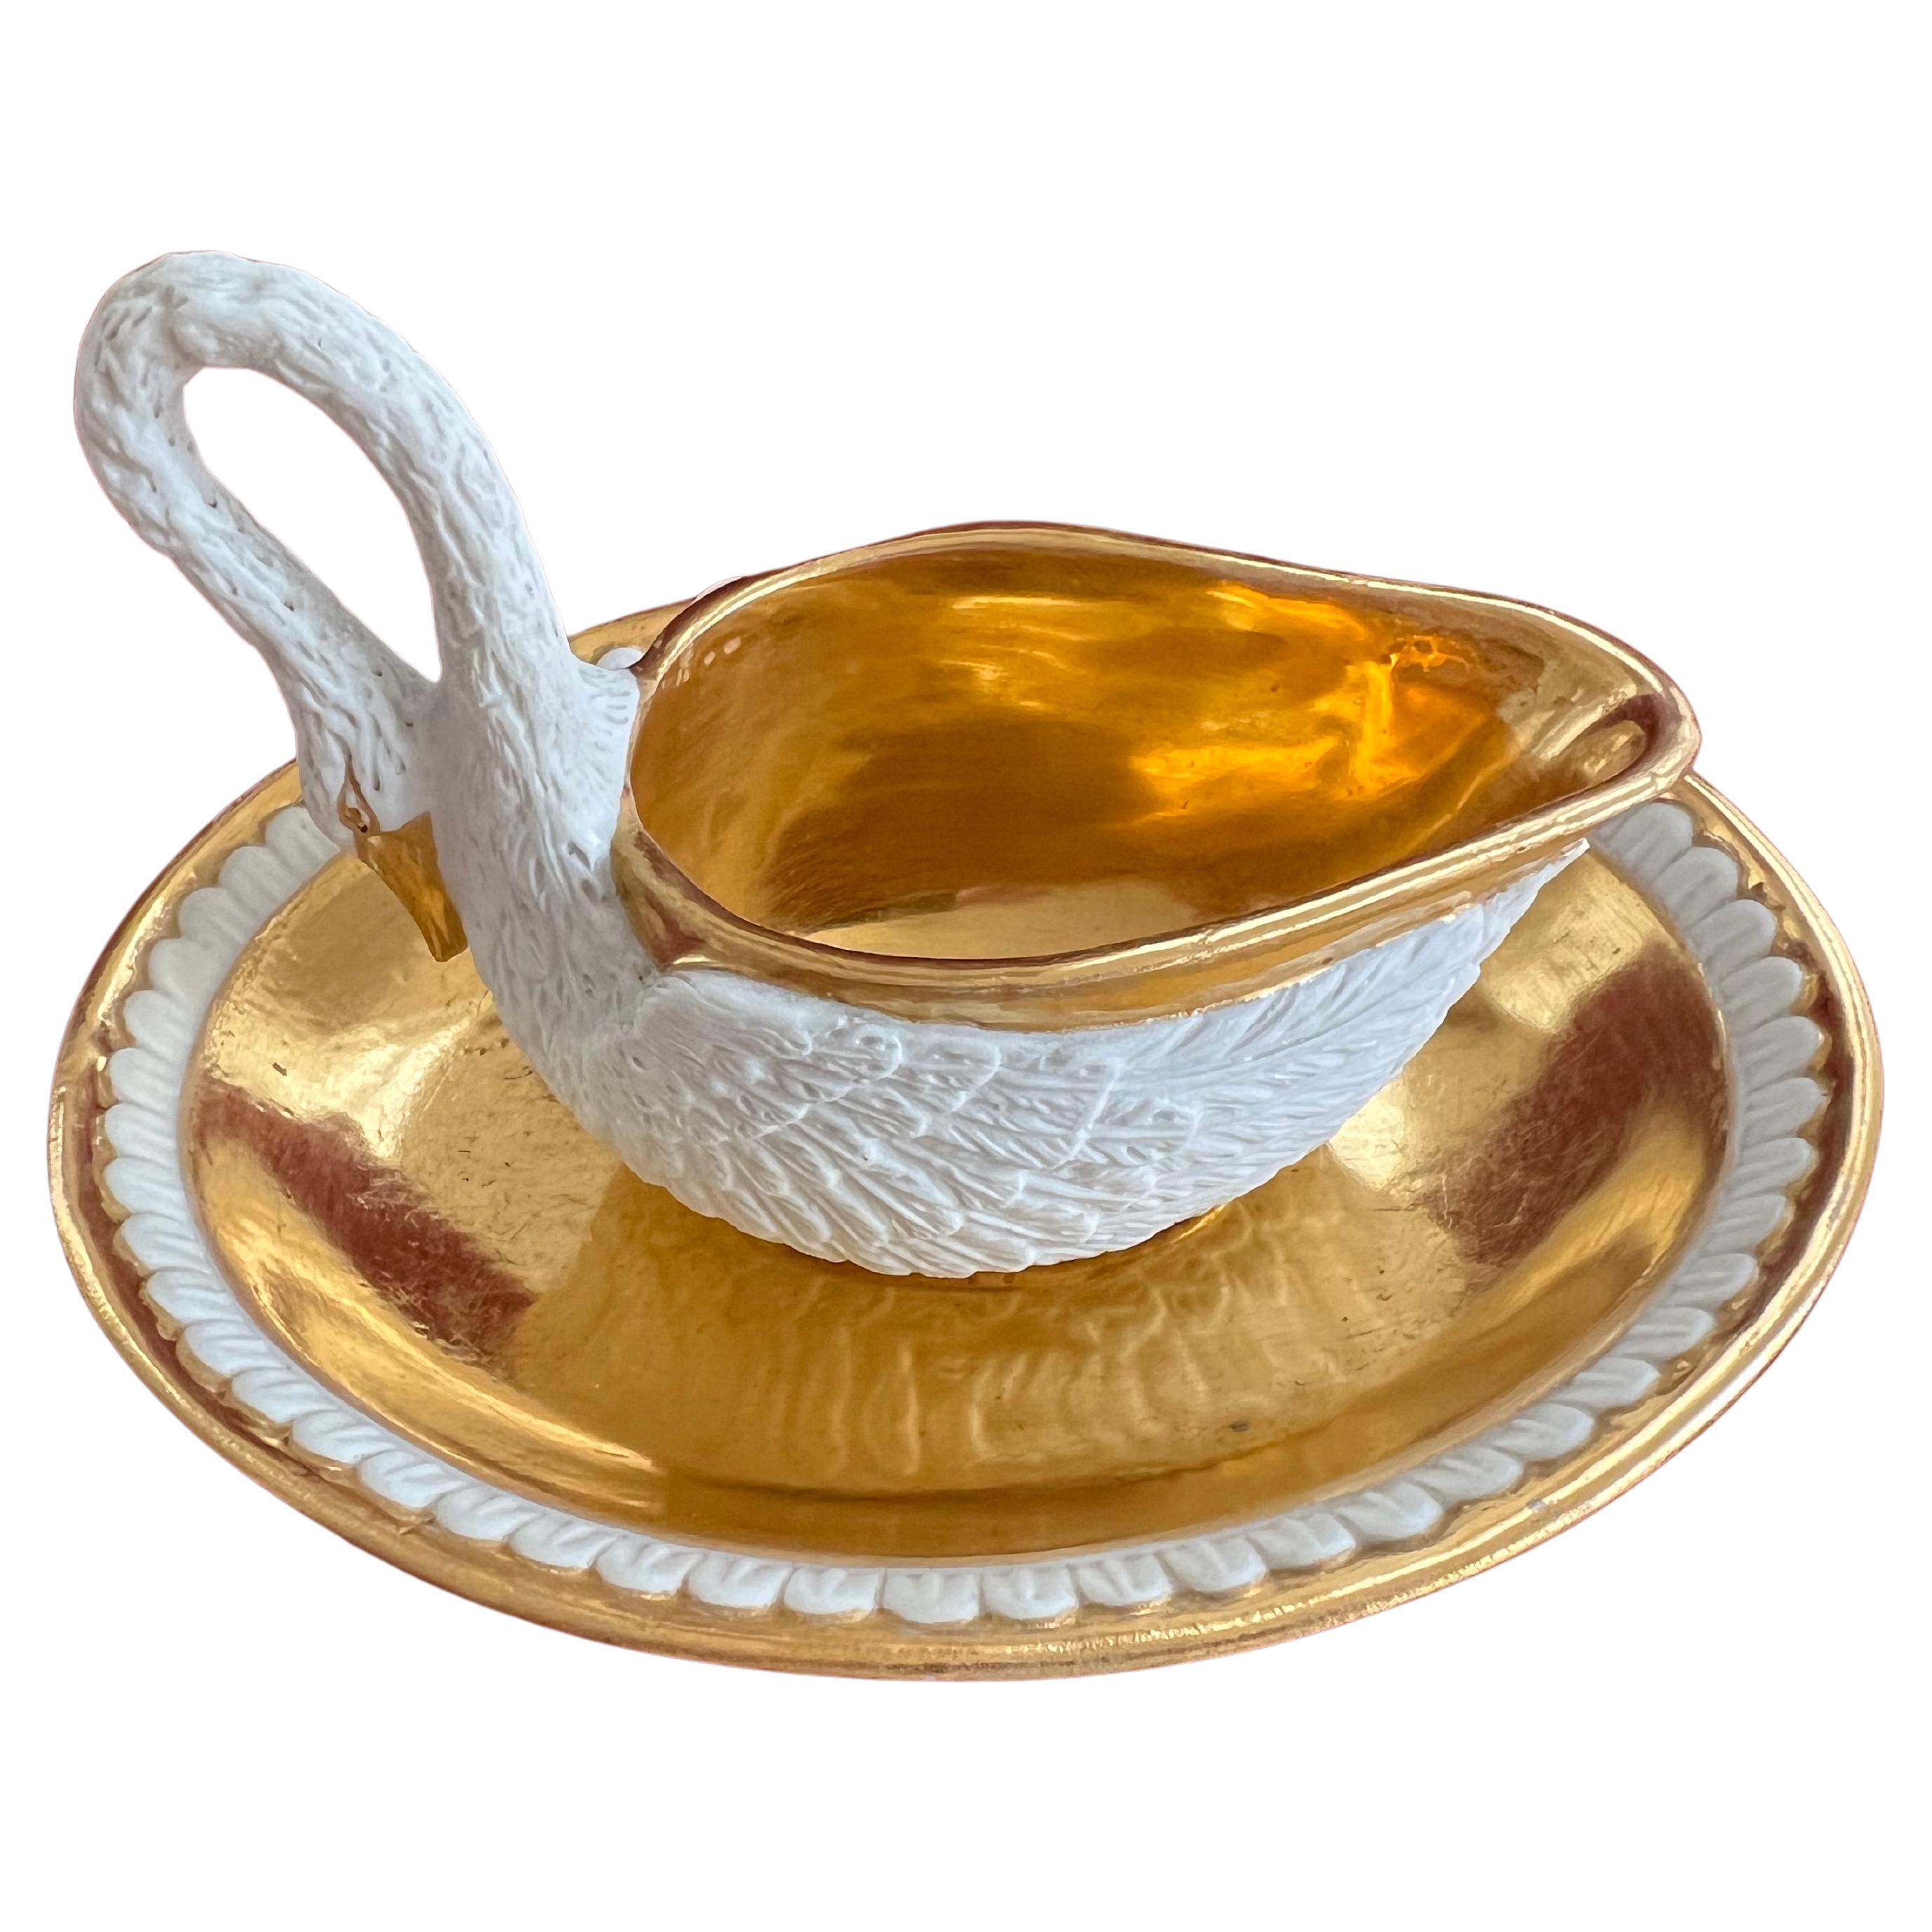 Very Fine Sevres Cup and Saucer Modelled as a Naturalistic Swan